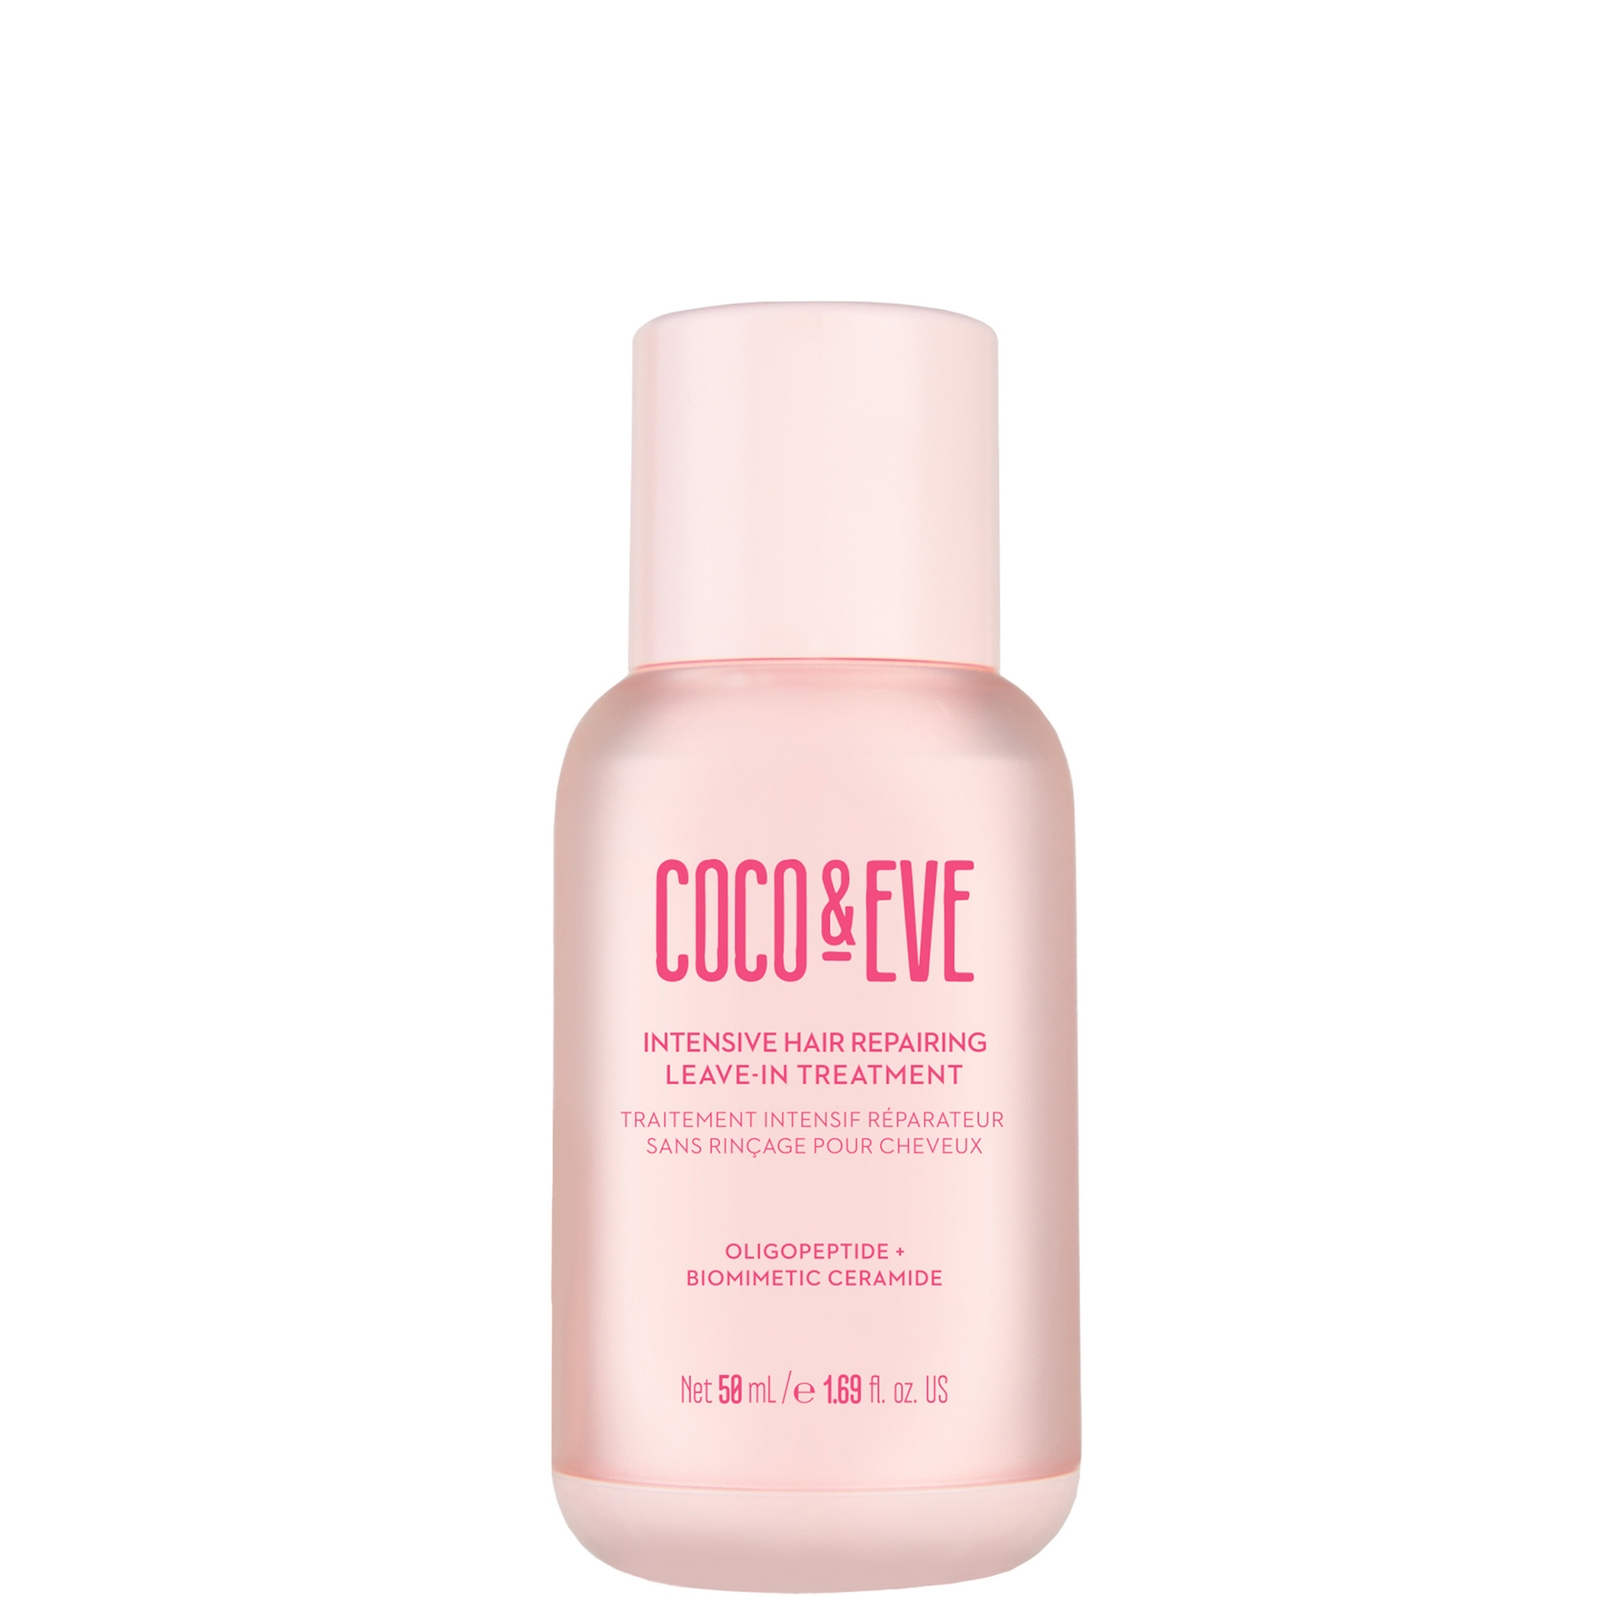 Image of Coco & Eve Intensive Hair Repairing Leave-in Treatment 50ml